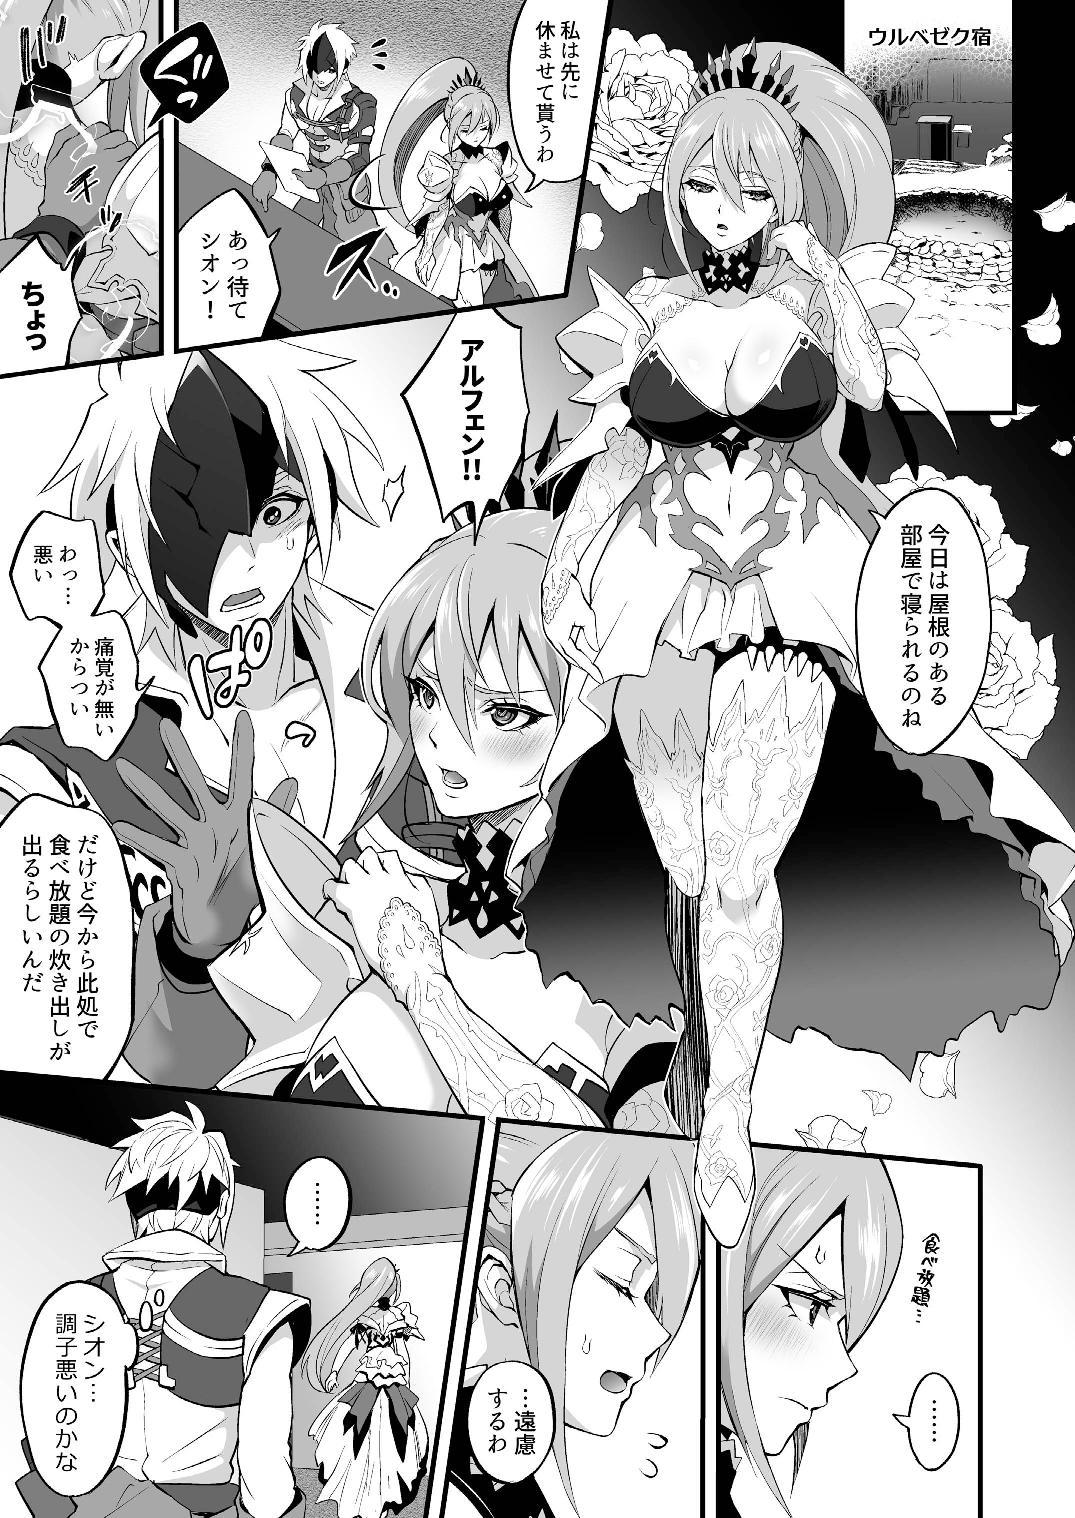 Dom 私に詰め寄ると〇〇〇がイくわよ…! - Tales of arise Analsex - Page 3